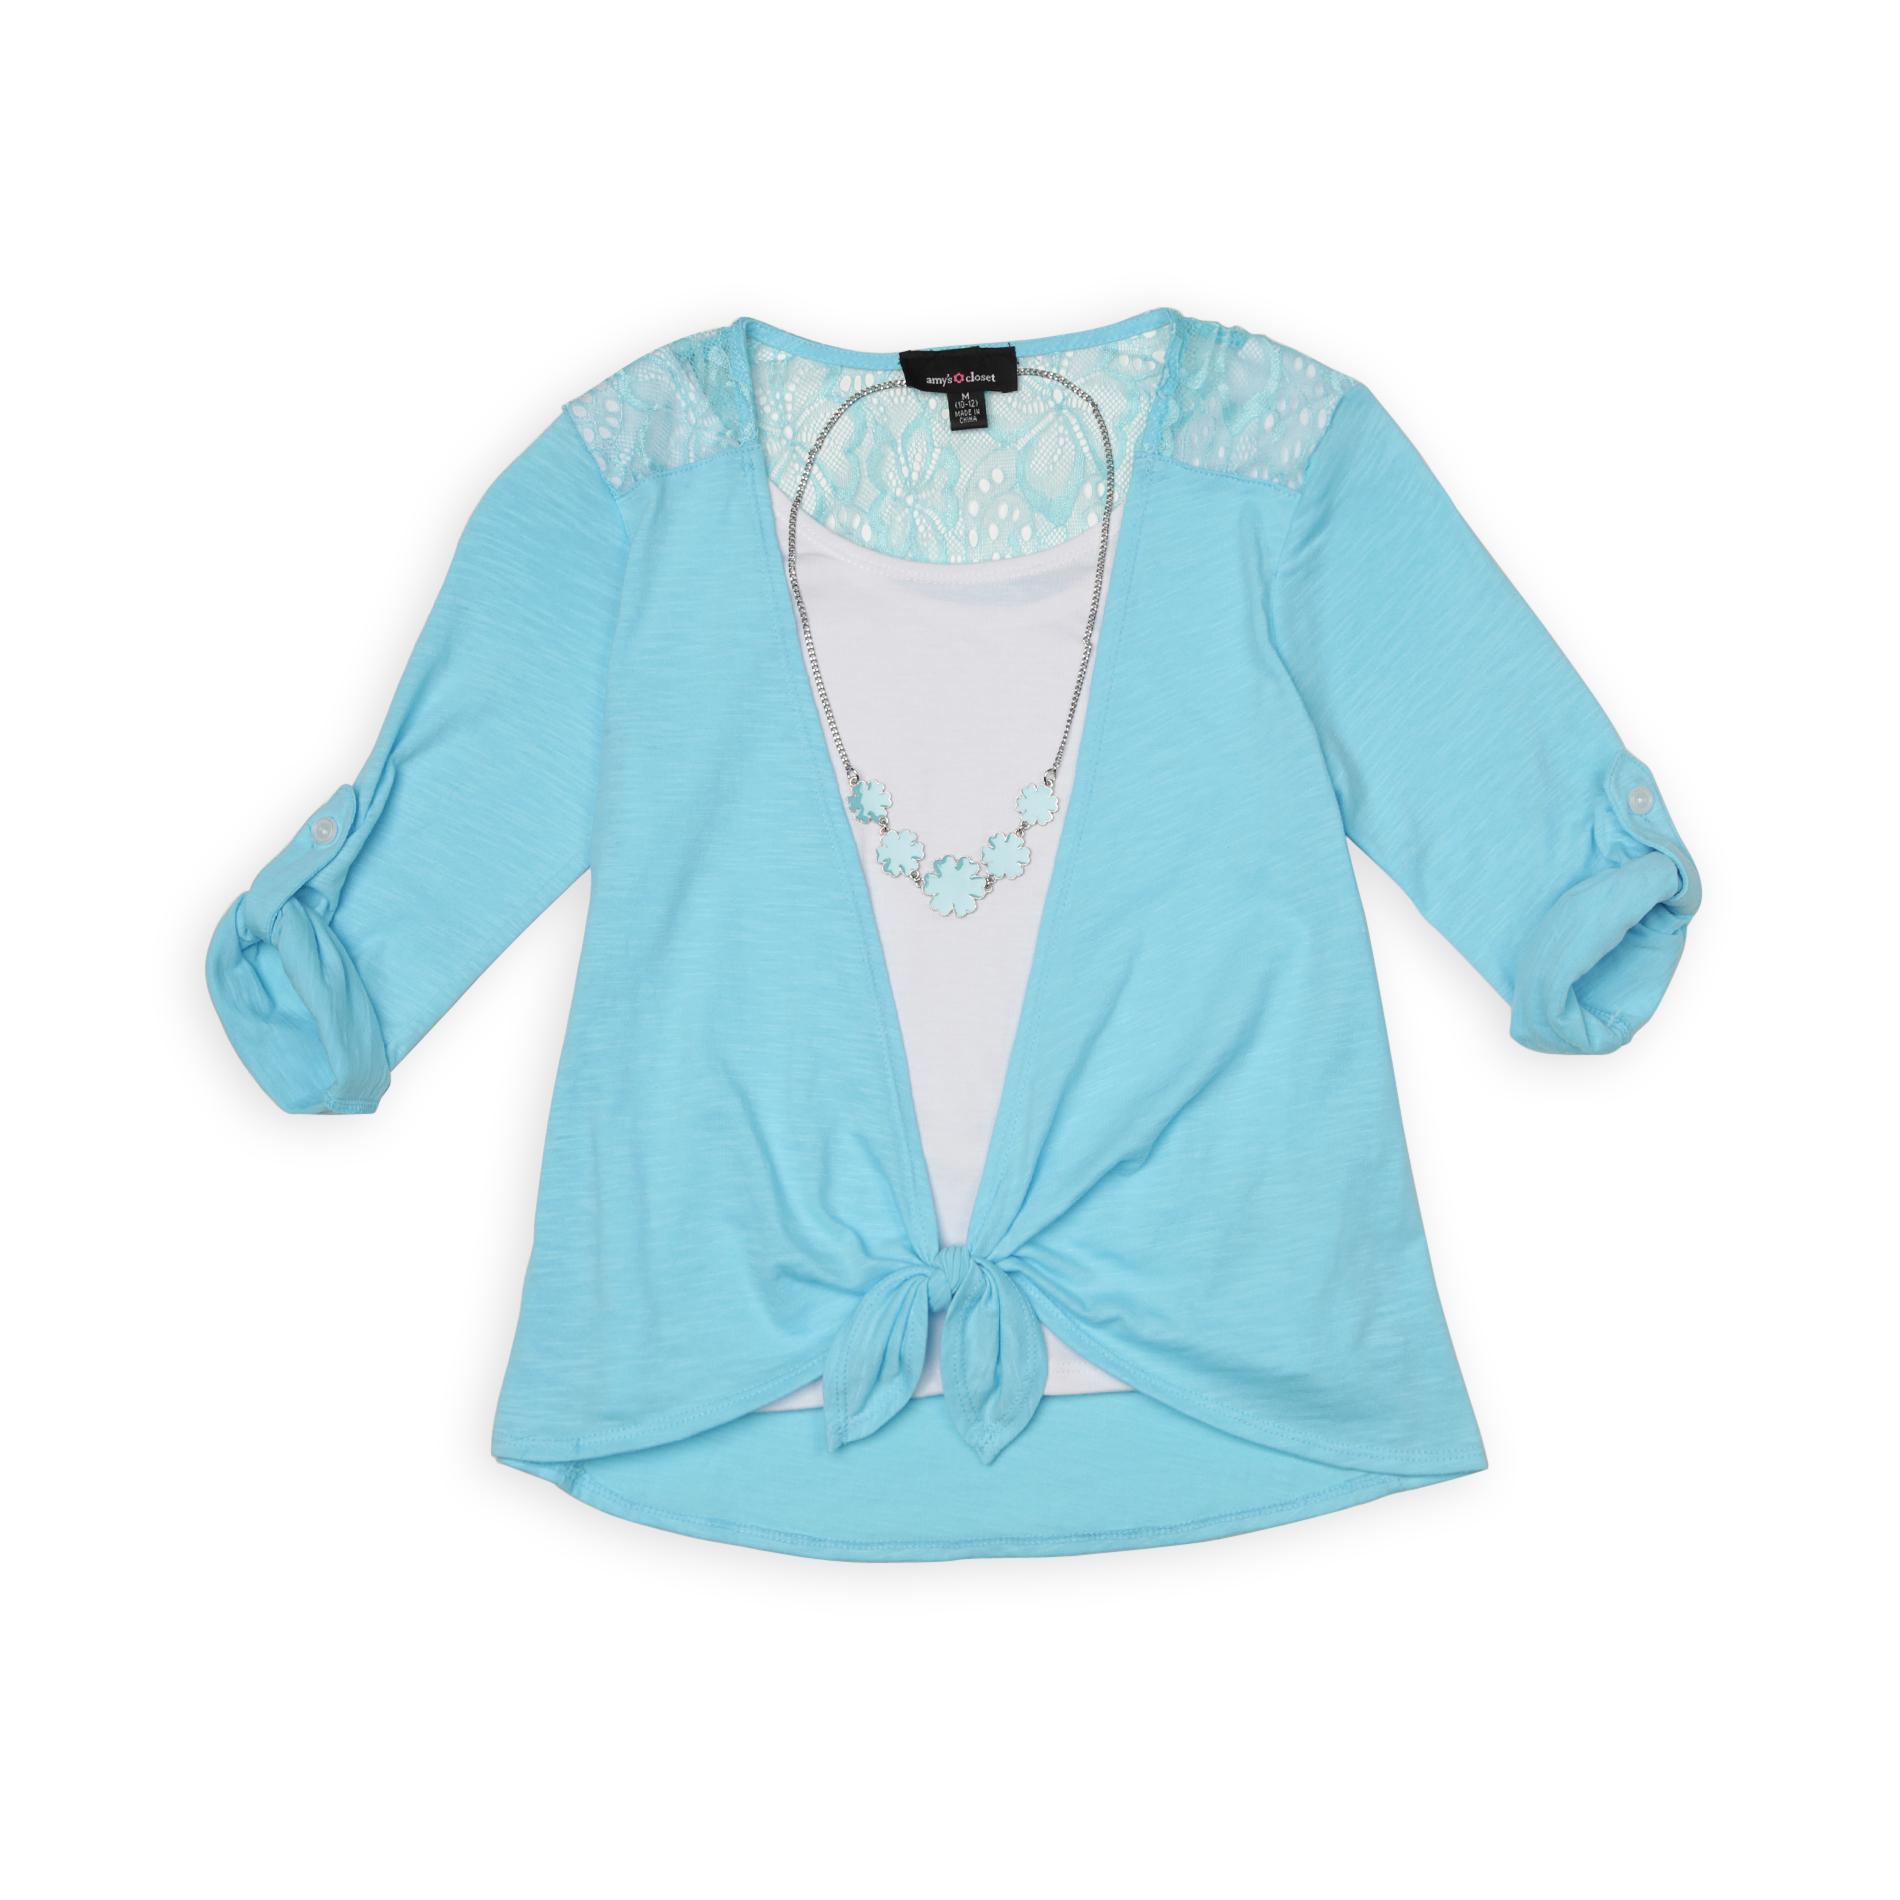 Amy's Closet Girl's Tie-Front Layered Top & Necklace